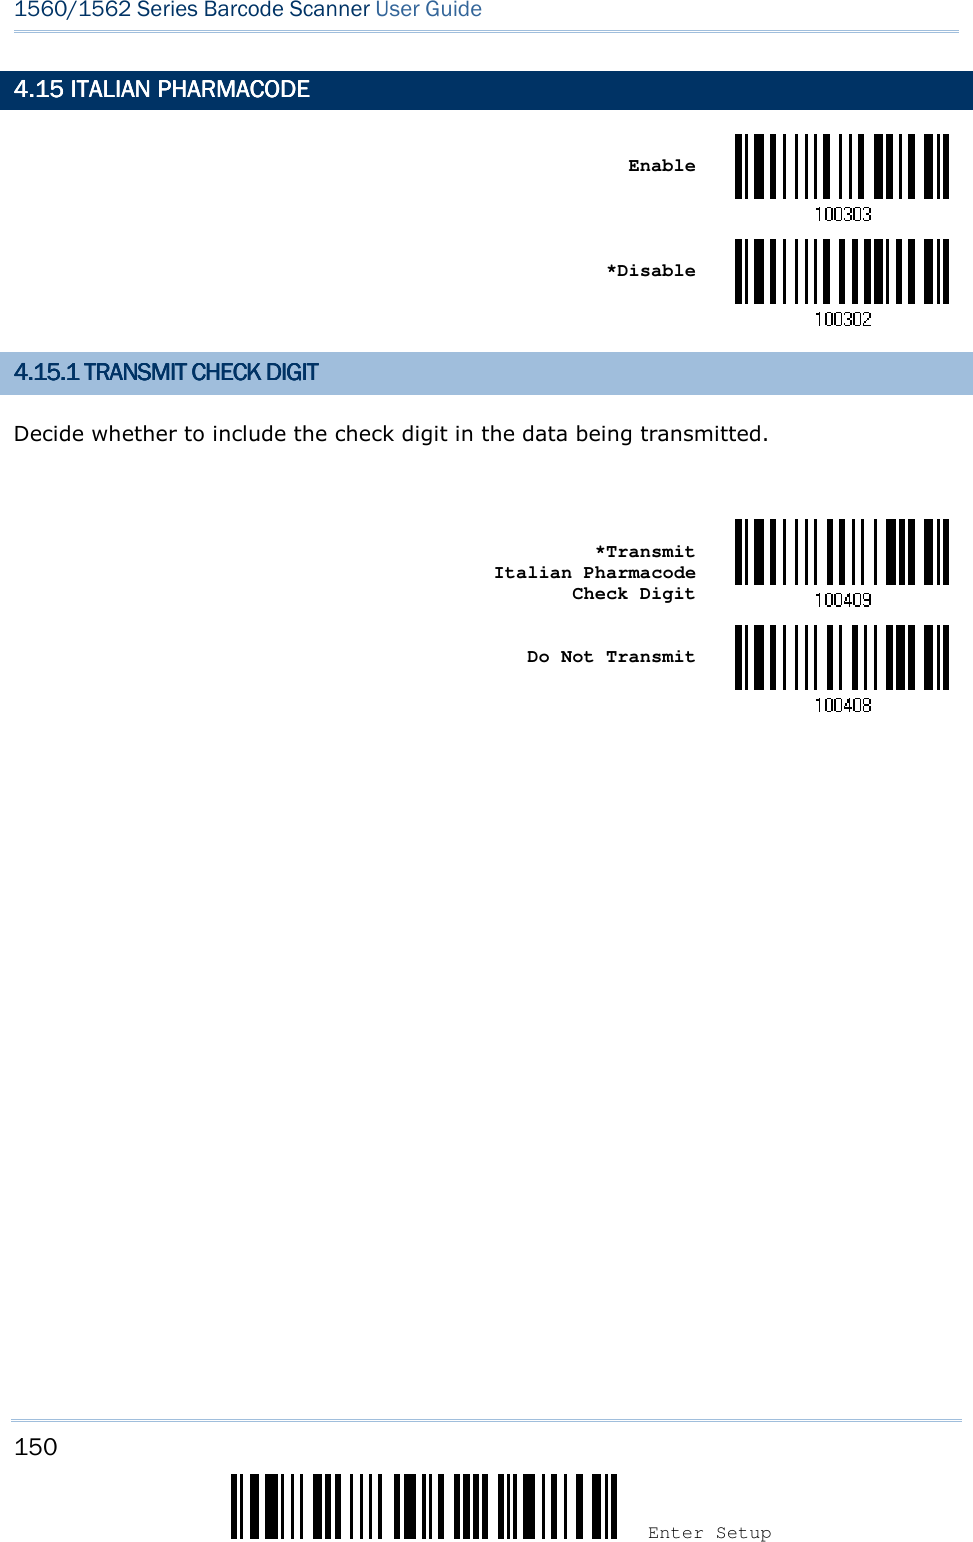 150 Enter Setup 1560/1562 Series Barcode Scanner User Guide  4.14.14.14.15555    ITALIAN PHARMACODEITALIAN PHARMACODEITALIAN PHARMACODEITALIAN PHARMACODE       Enable     *Disable  4.14.14.14.15555.1.1.1.1    TRANSMIT CHECK DIGITTRANSMIT CHECK DIGITTRANSMIT CHECK DIGITTRANSMIT CHECK DIGIT    Decide whether to include the check digit in the data being transmitted.     *Transmit     Italian Pharmacode     Check Digit     Do Not Transmit           